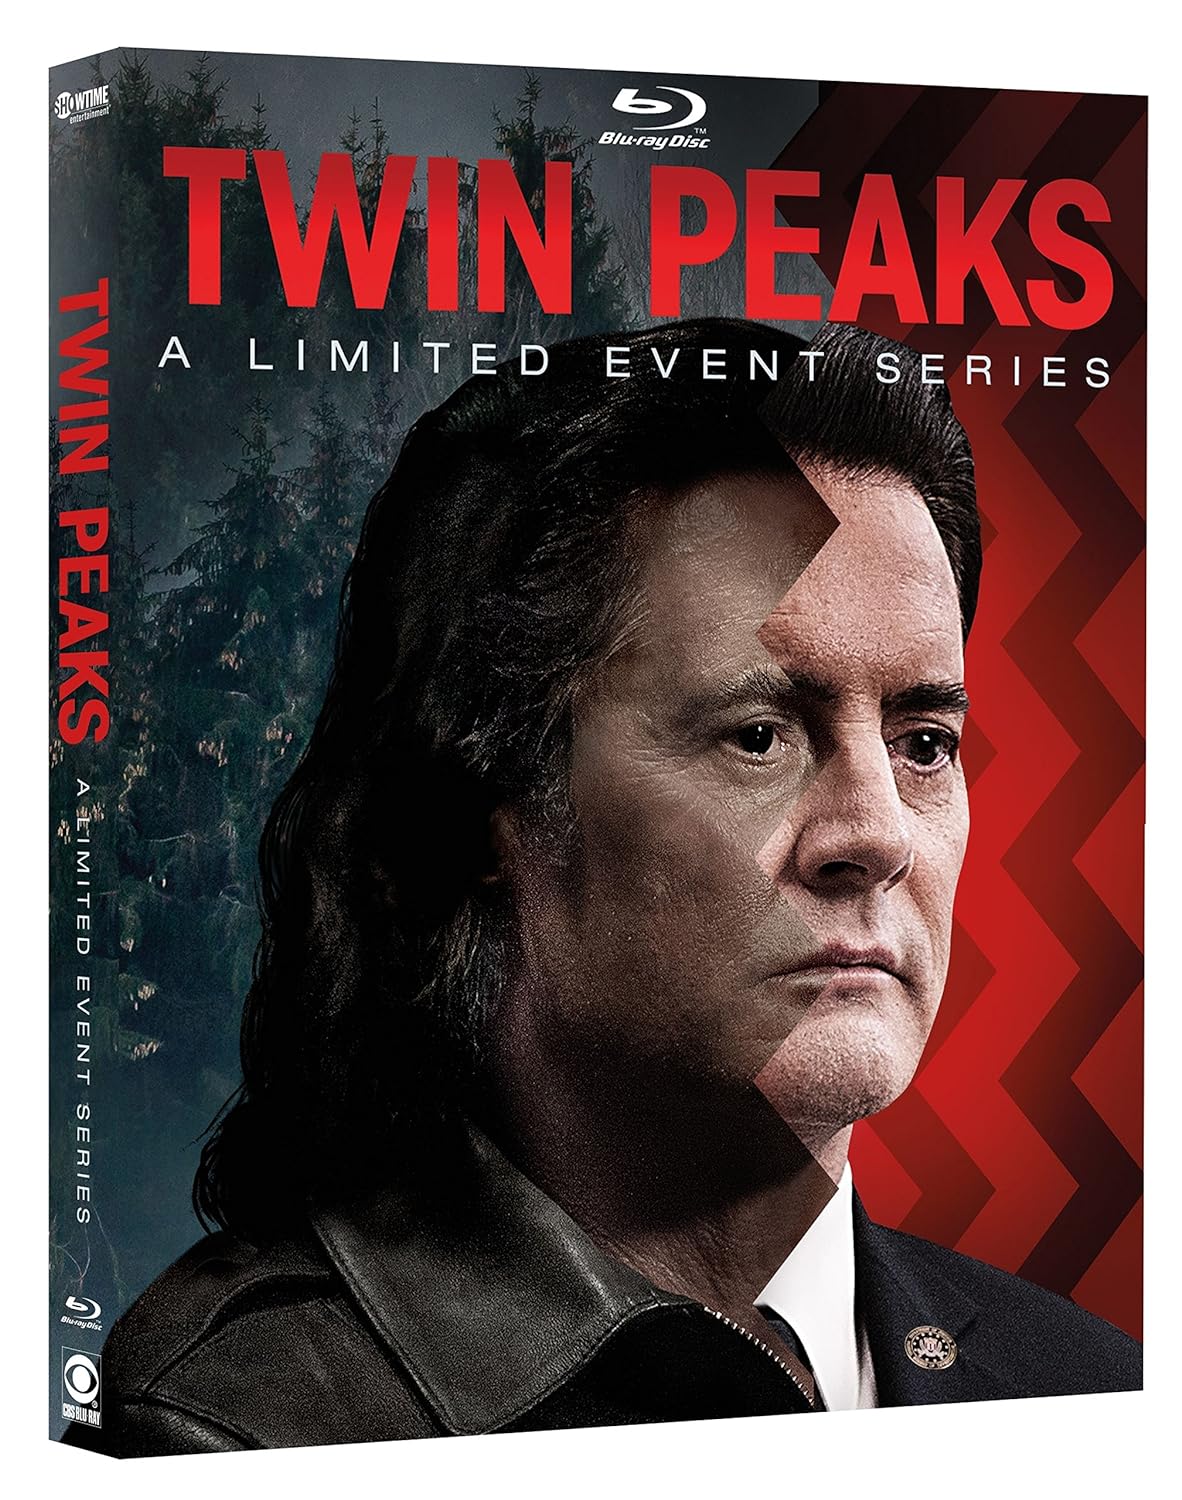 Twin Peaks: A Limited Event Series (2017) (Blu-Ray) $25.99 via Amazon